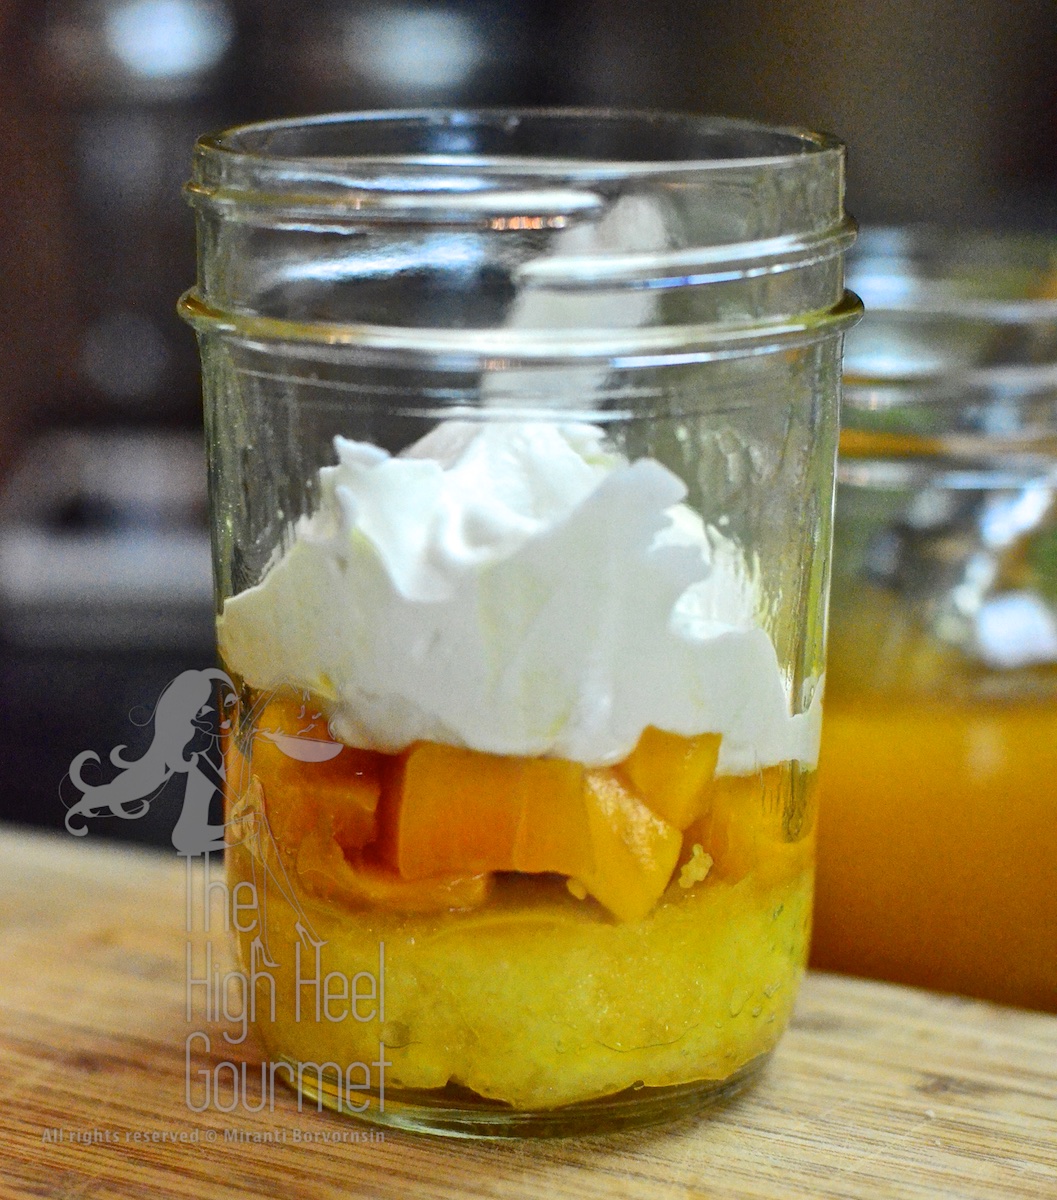 Cake in a jar - Mango Passion Fruit with Whipped Yogurt Frosting by The High Heel Gourmet 20